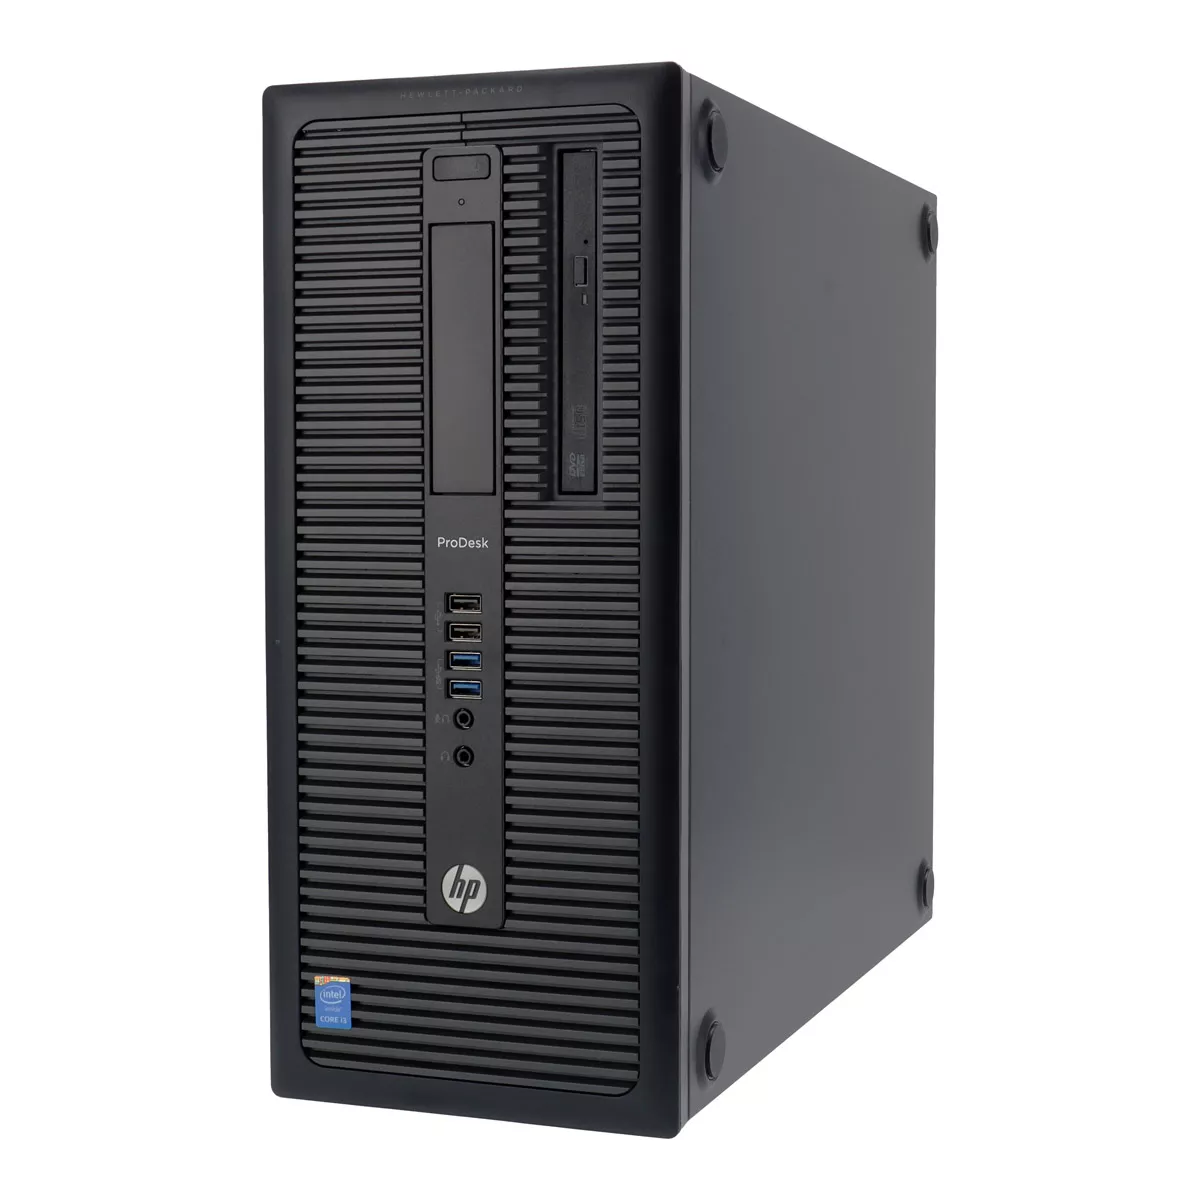 HP ProDesk 600 G1 Tower Core i3 4130 3,4 GHz 4 GB 500 GB